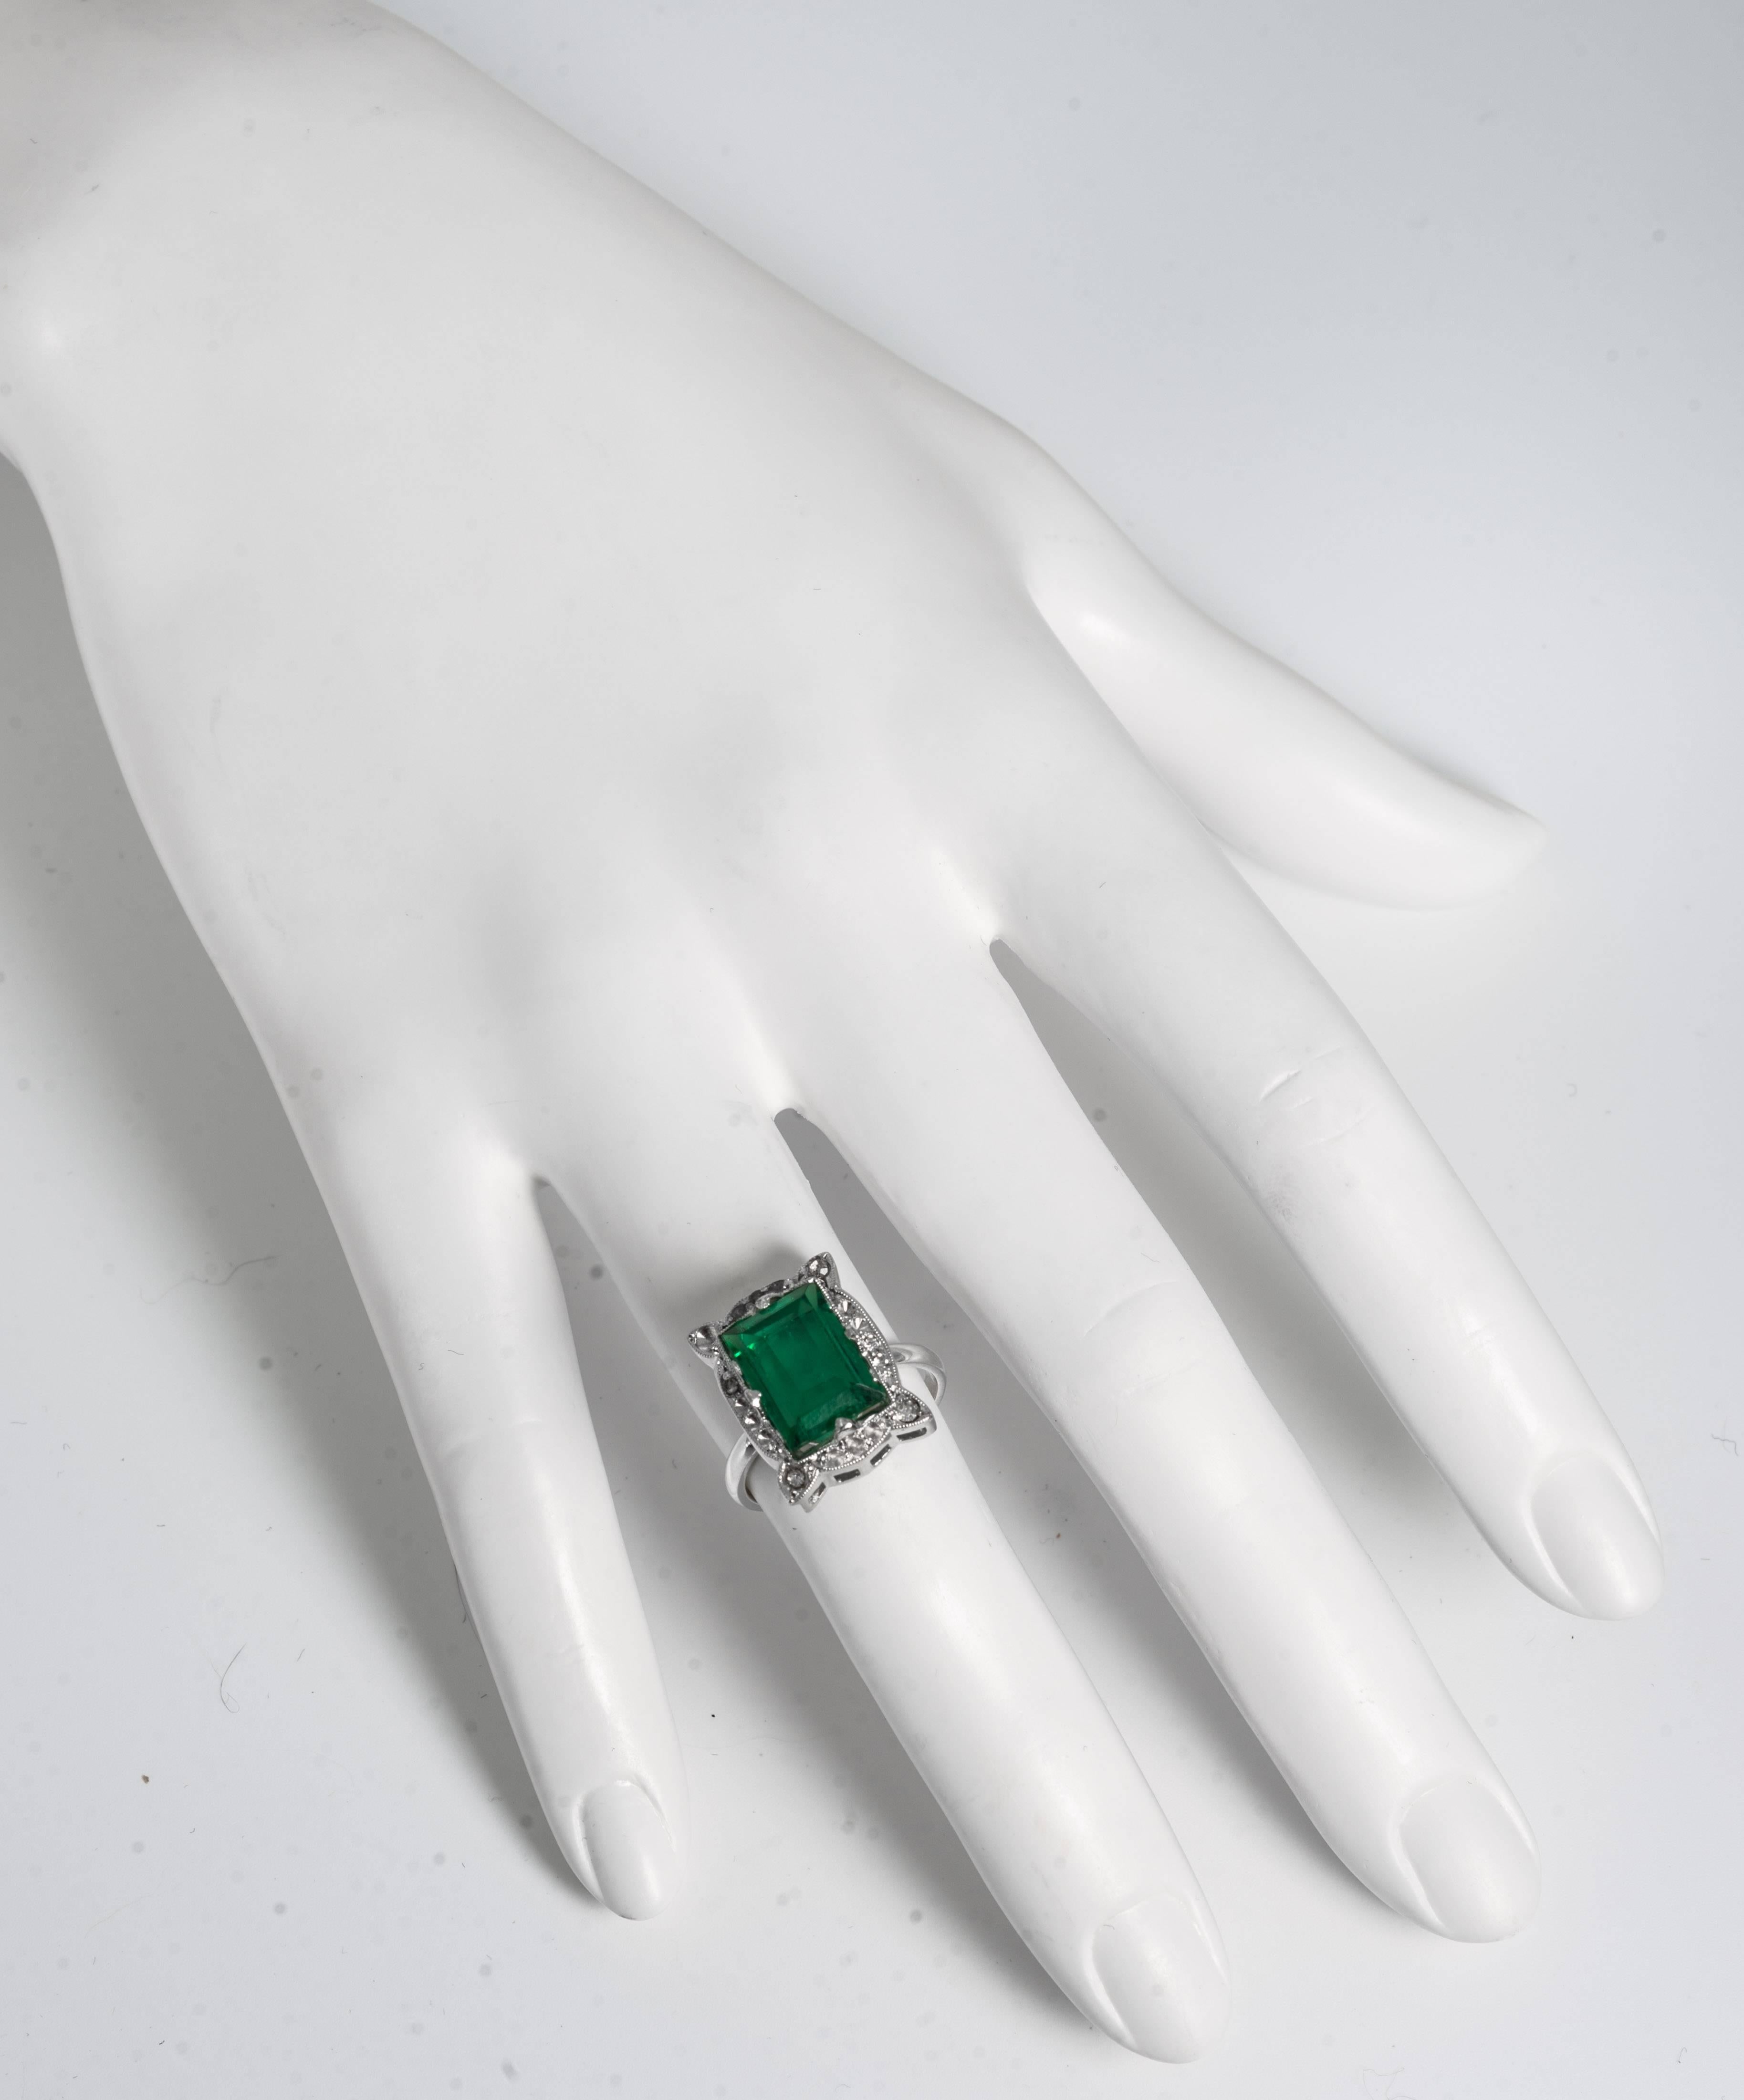 A wonderful rare Art Deco faux diamond emerald sterling paste 1920s ring.
Please state size you would like when ordering this unique one-of-a-kind ring.
Measures 3/4inch long by 1/2inch deep.